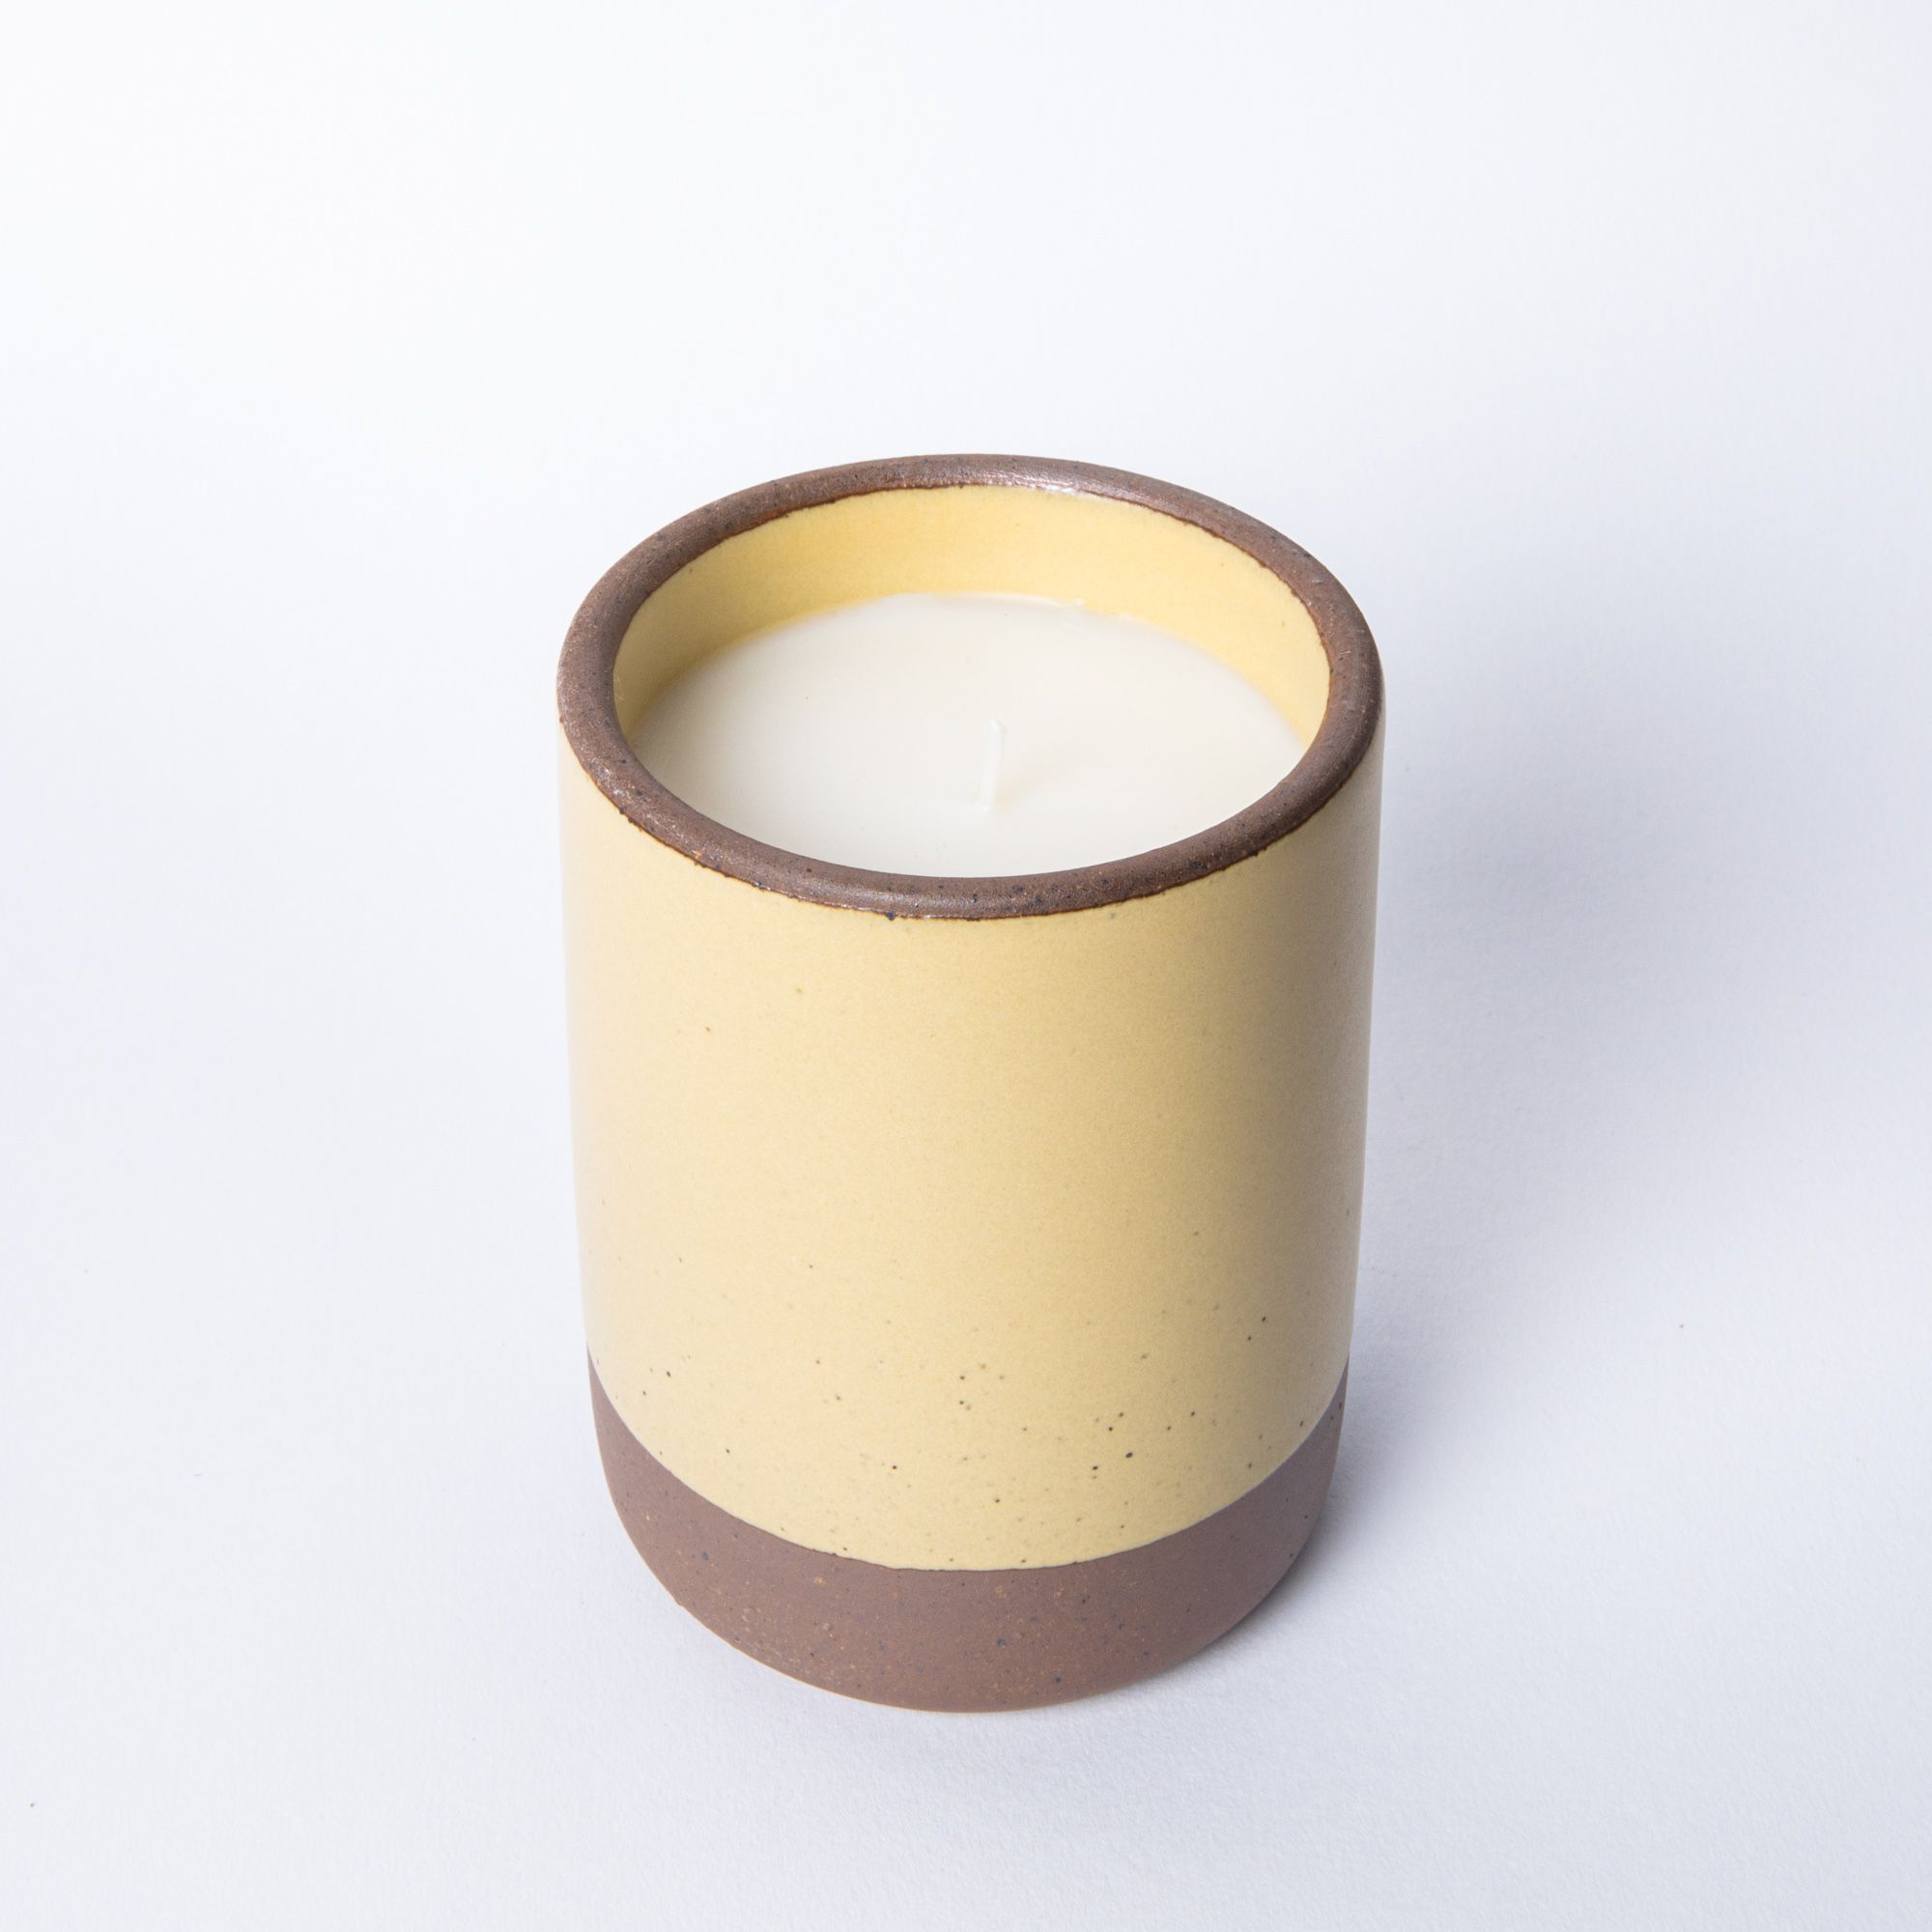 Large ceramic vessel in soft butter yellow color with candle inside